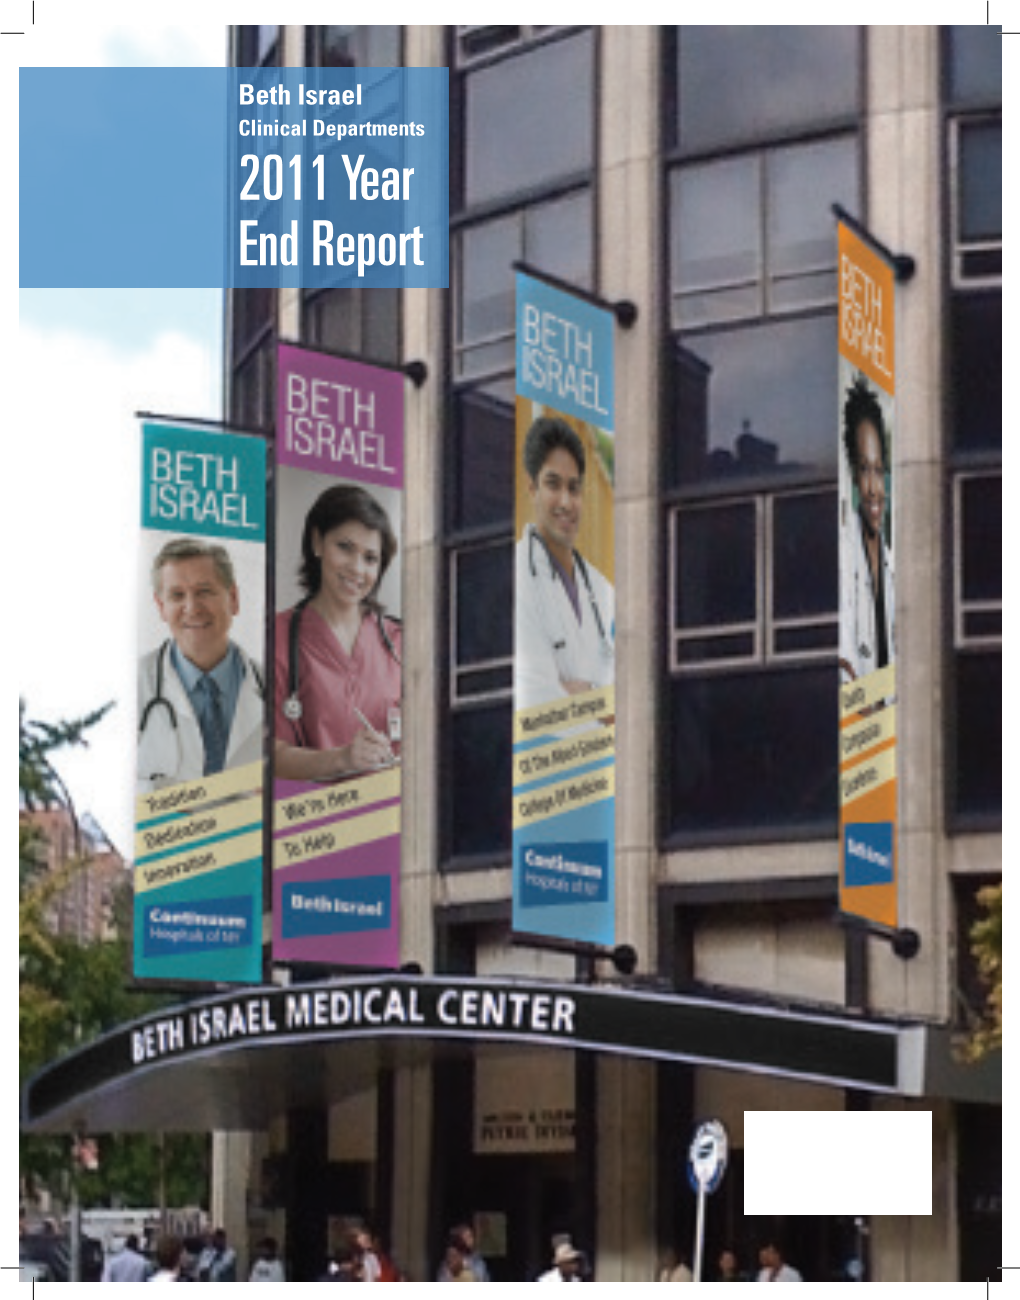 Beth Israel Clinical Departments 2011 Year End Report